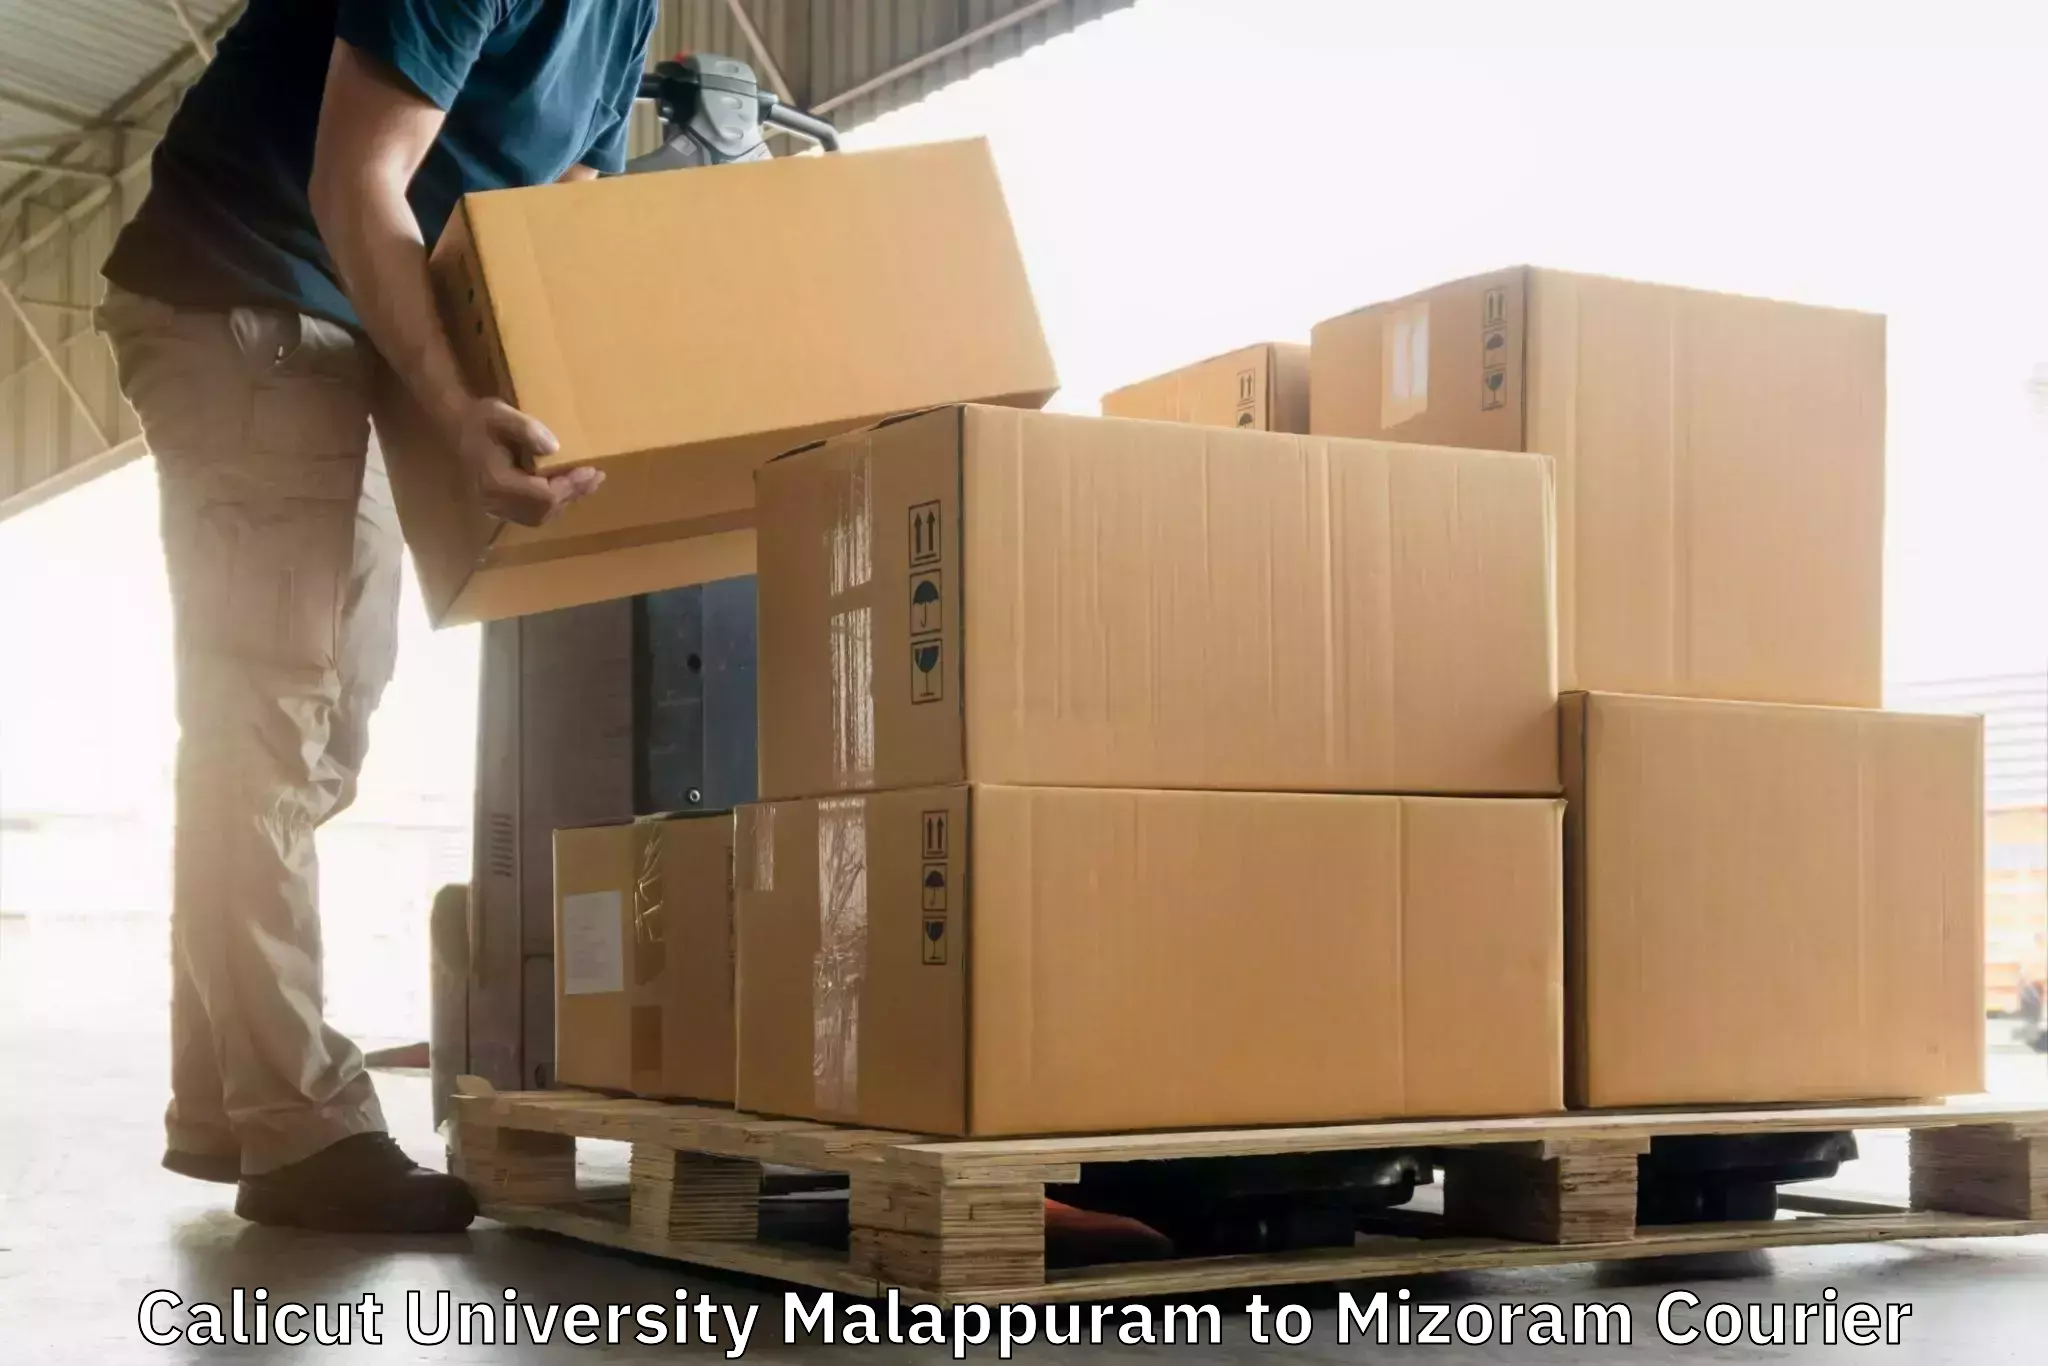 Reliable courier services Calicut University Malappuram to Mamit